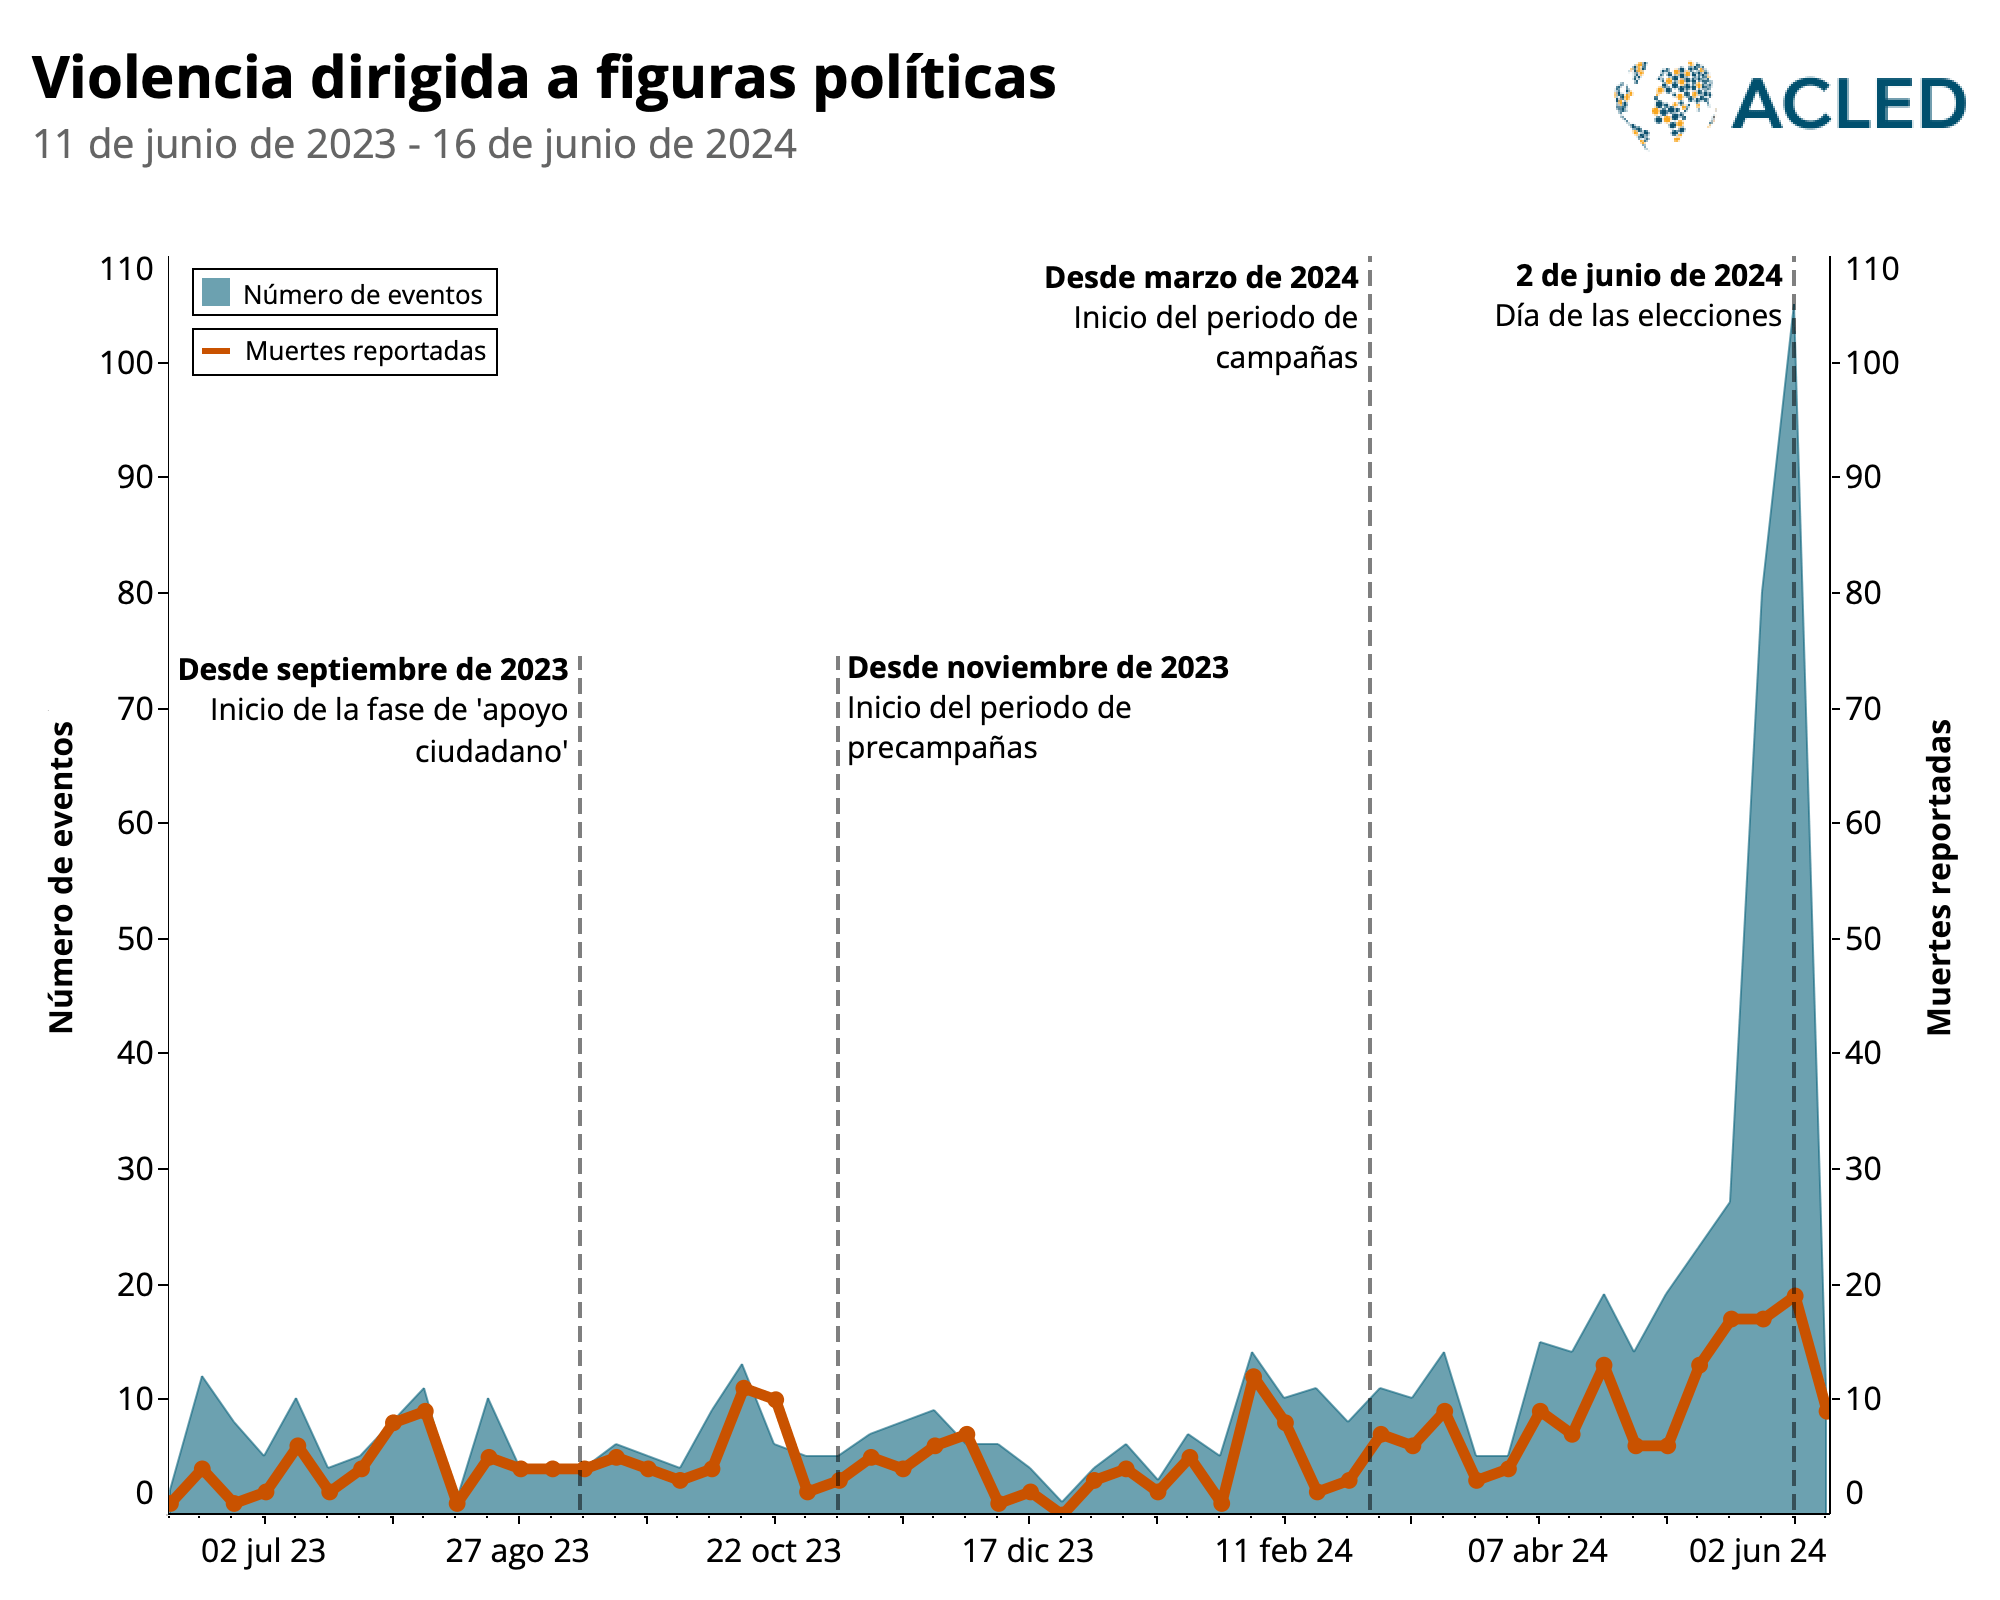 Combined chart - Violence targeting political figures 11 June 2023 to 16 June 2024 - Spanish